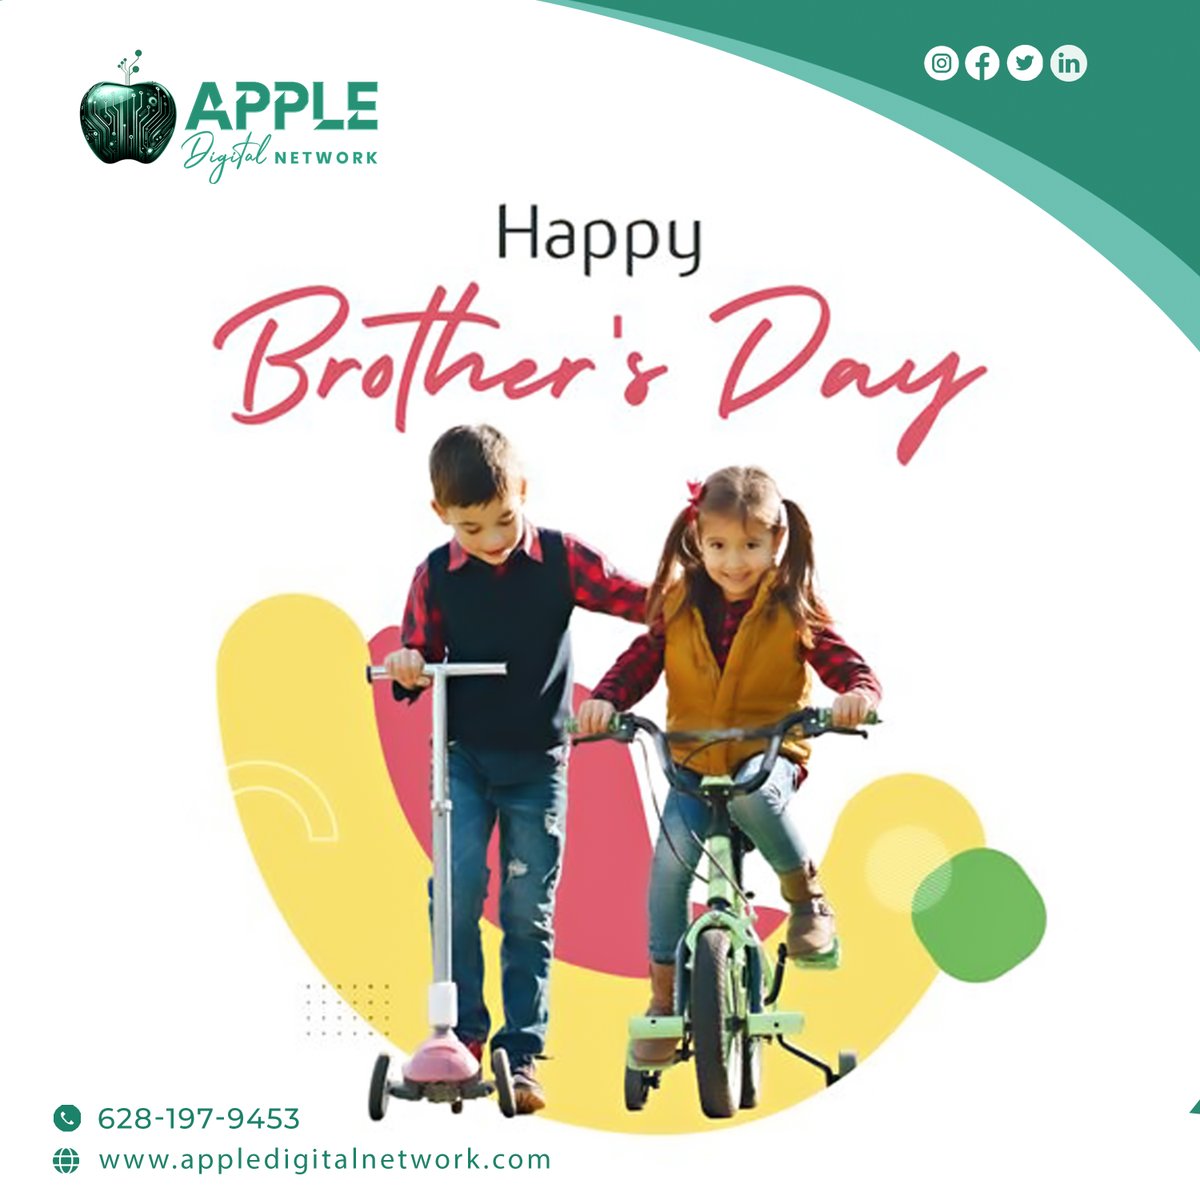 👬A brother is a friend forever, lending his hand in times of need and sharing smiles in moments of joy.💪

#HappyBrothersDay #BrotherlyLove #Brothers #Brotherhood #BestBrothers #BrothersForever #BrothersAndSisters
#BrotherSquad #BrothersDay2024 #BrothersDayCelebration